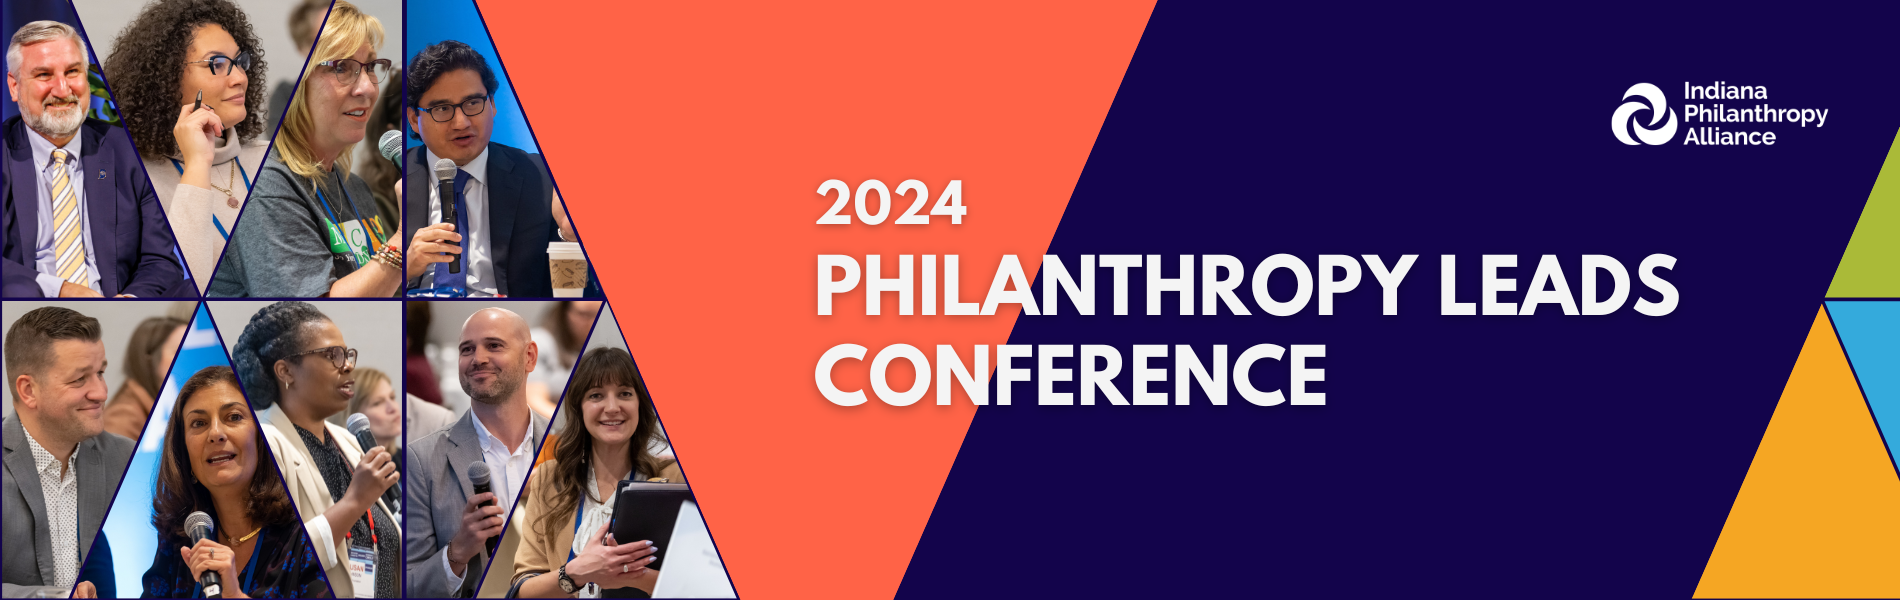 2024 Philanthropy Leads Conference